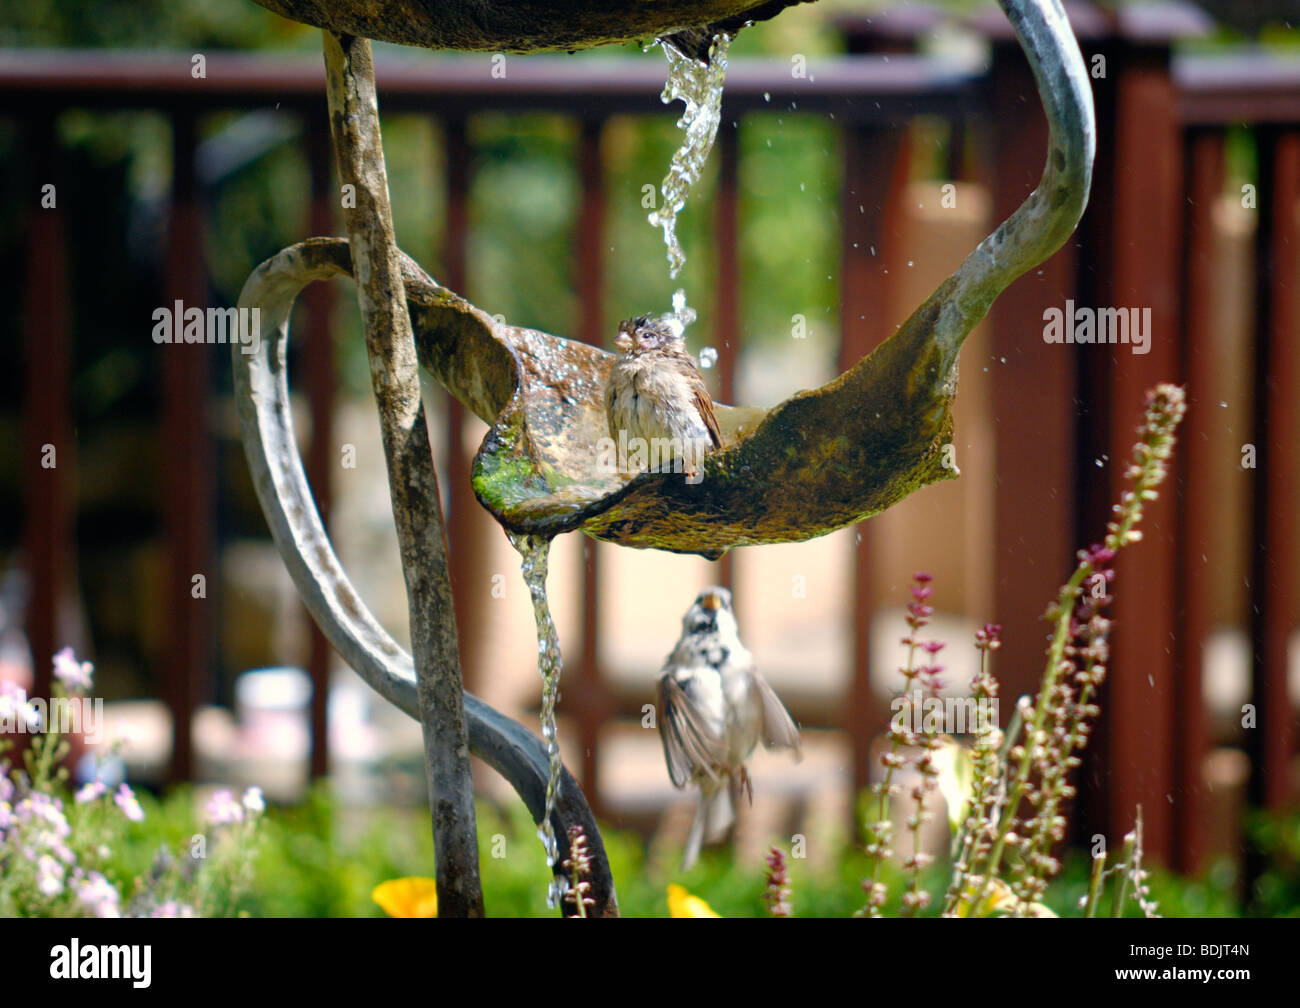 A bird bathing on an ornate water fountain Stock Photo